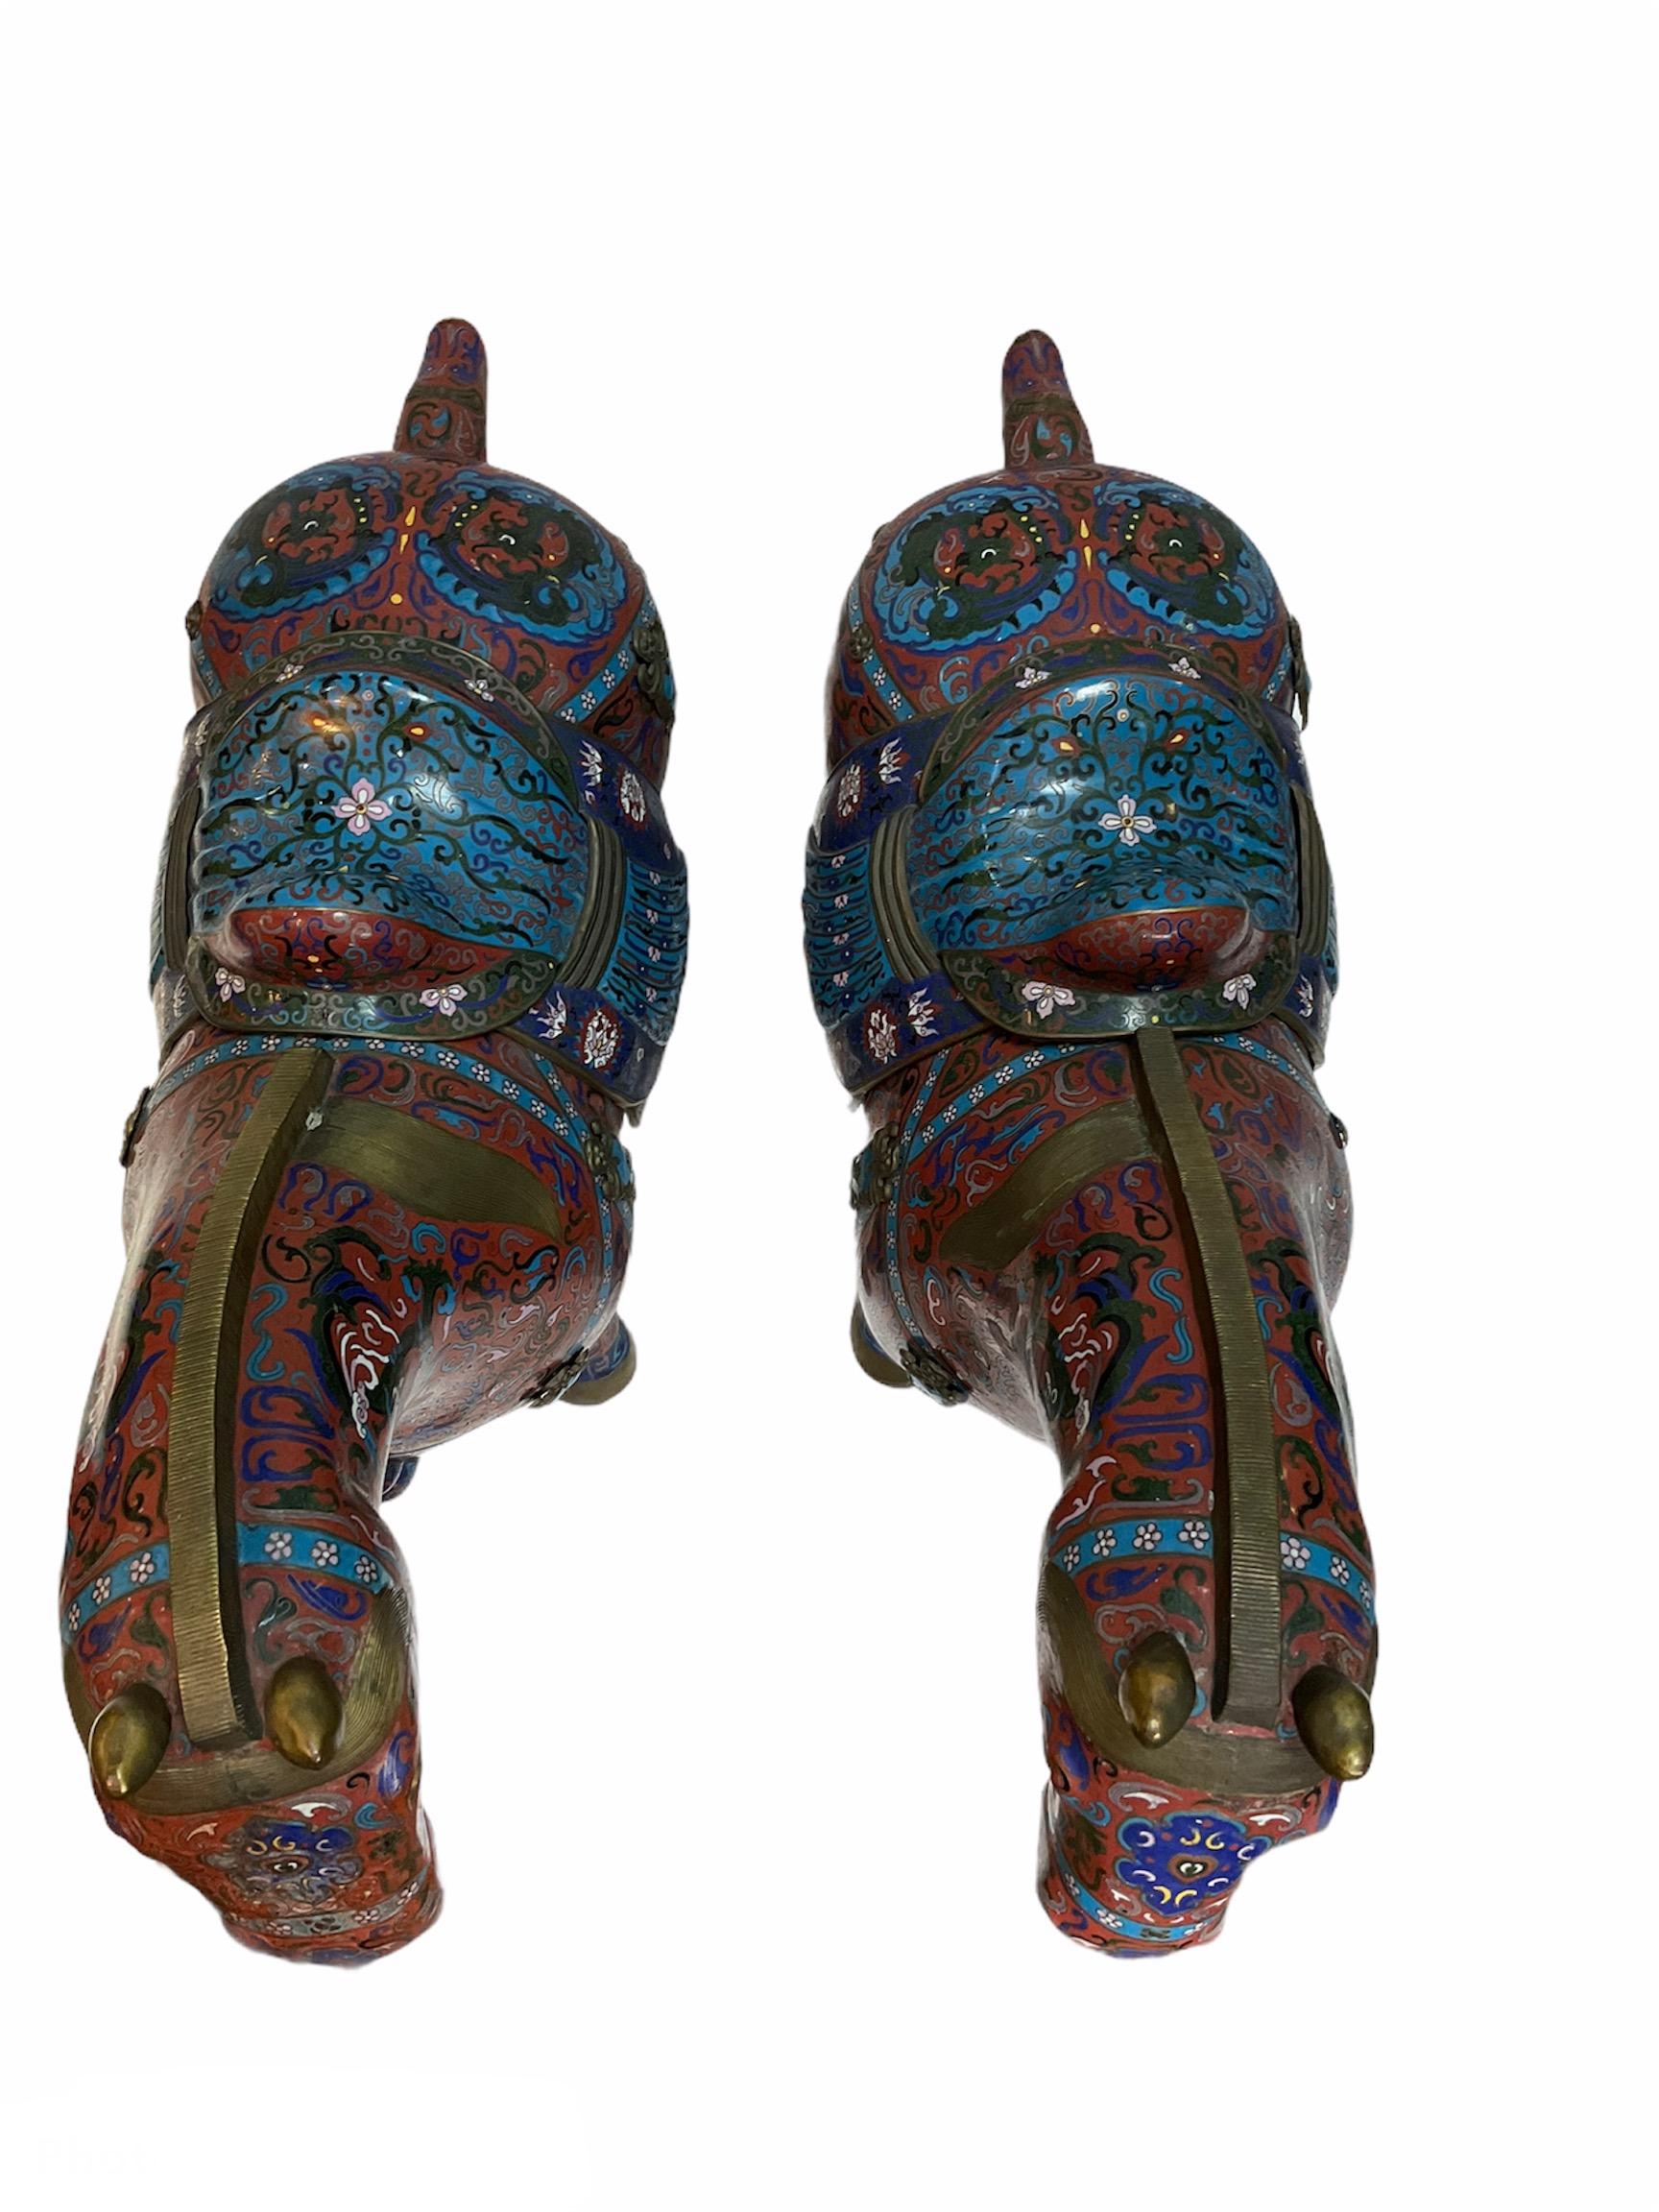 Metal Pair of Chinese Polychromatic Enamel Cloisonné Brass Horse Sculptures